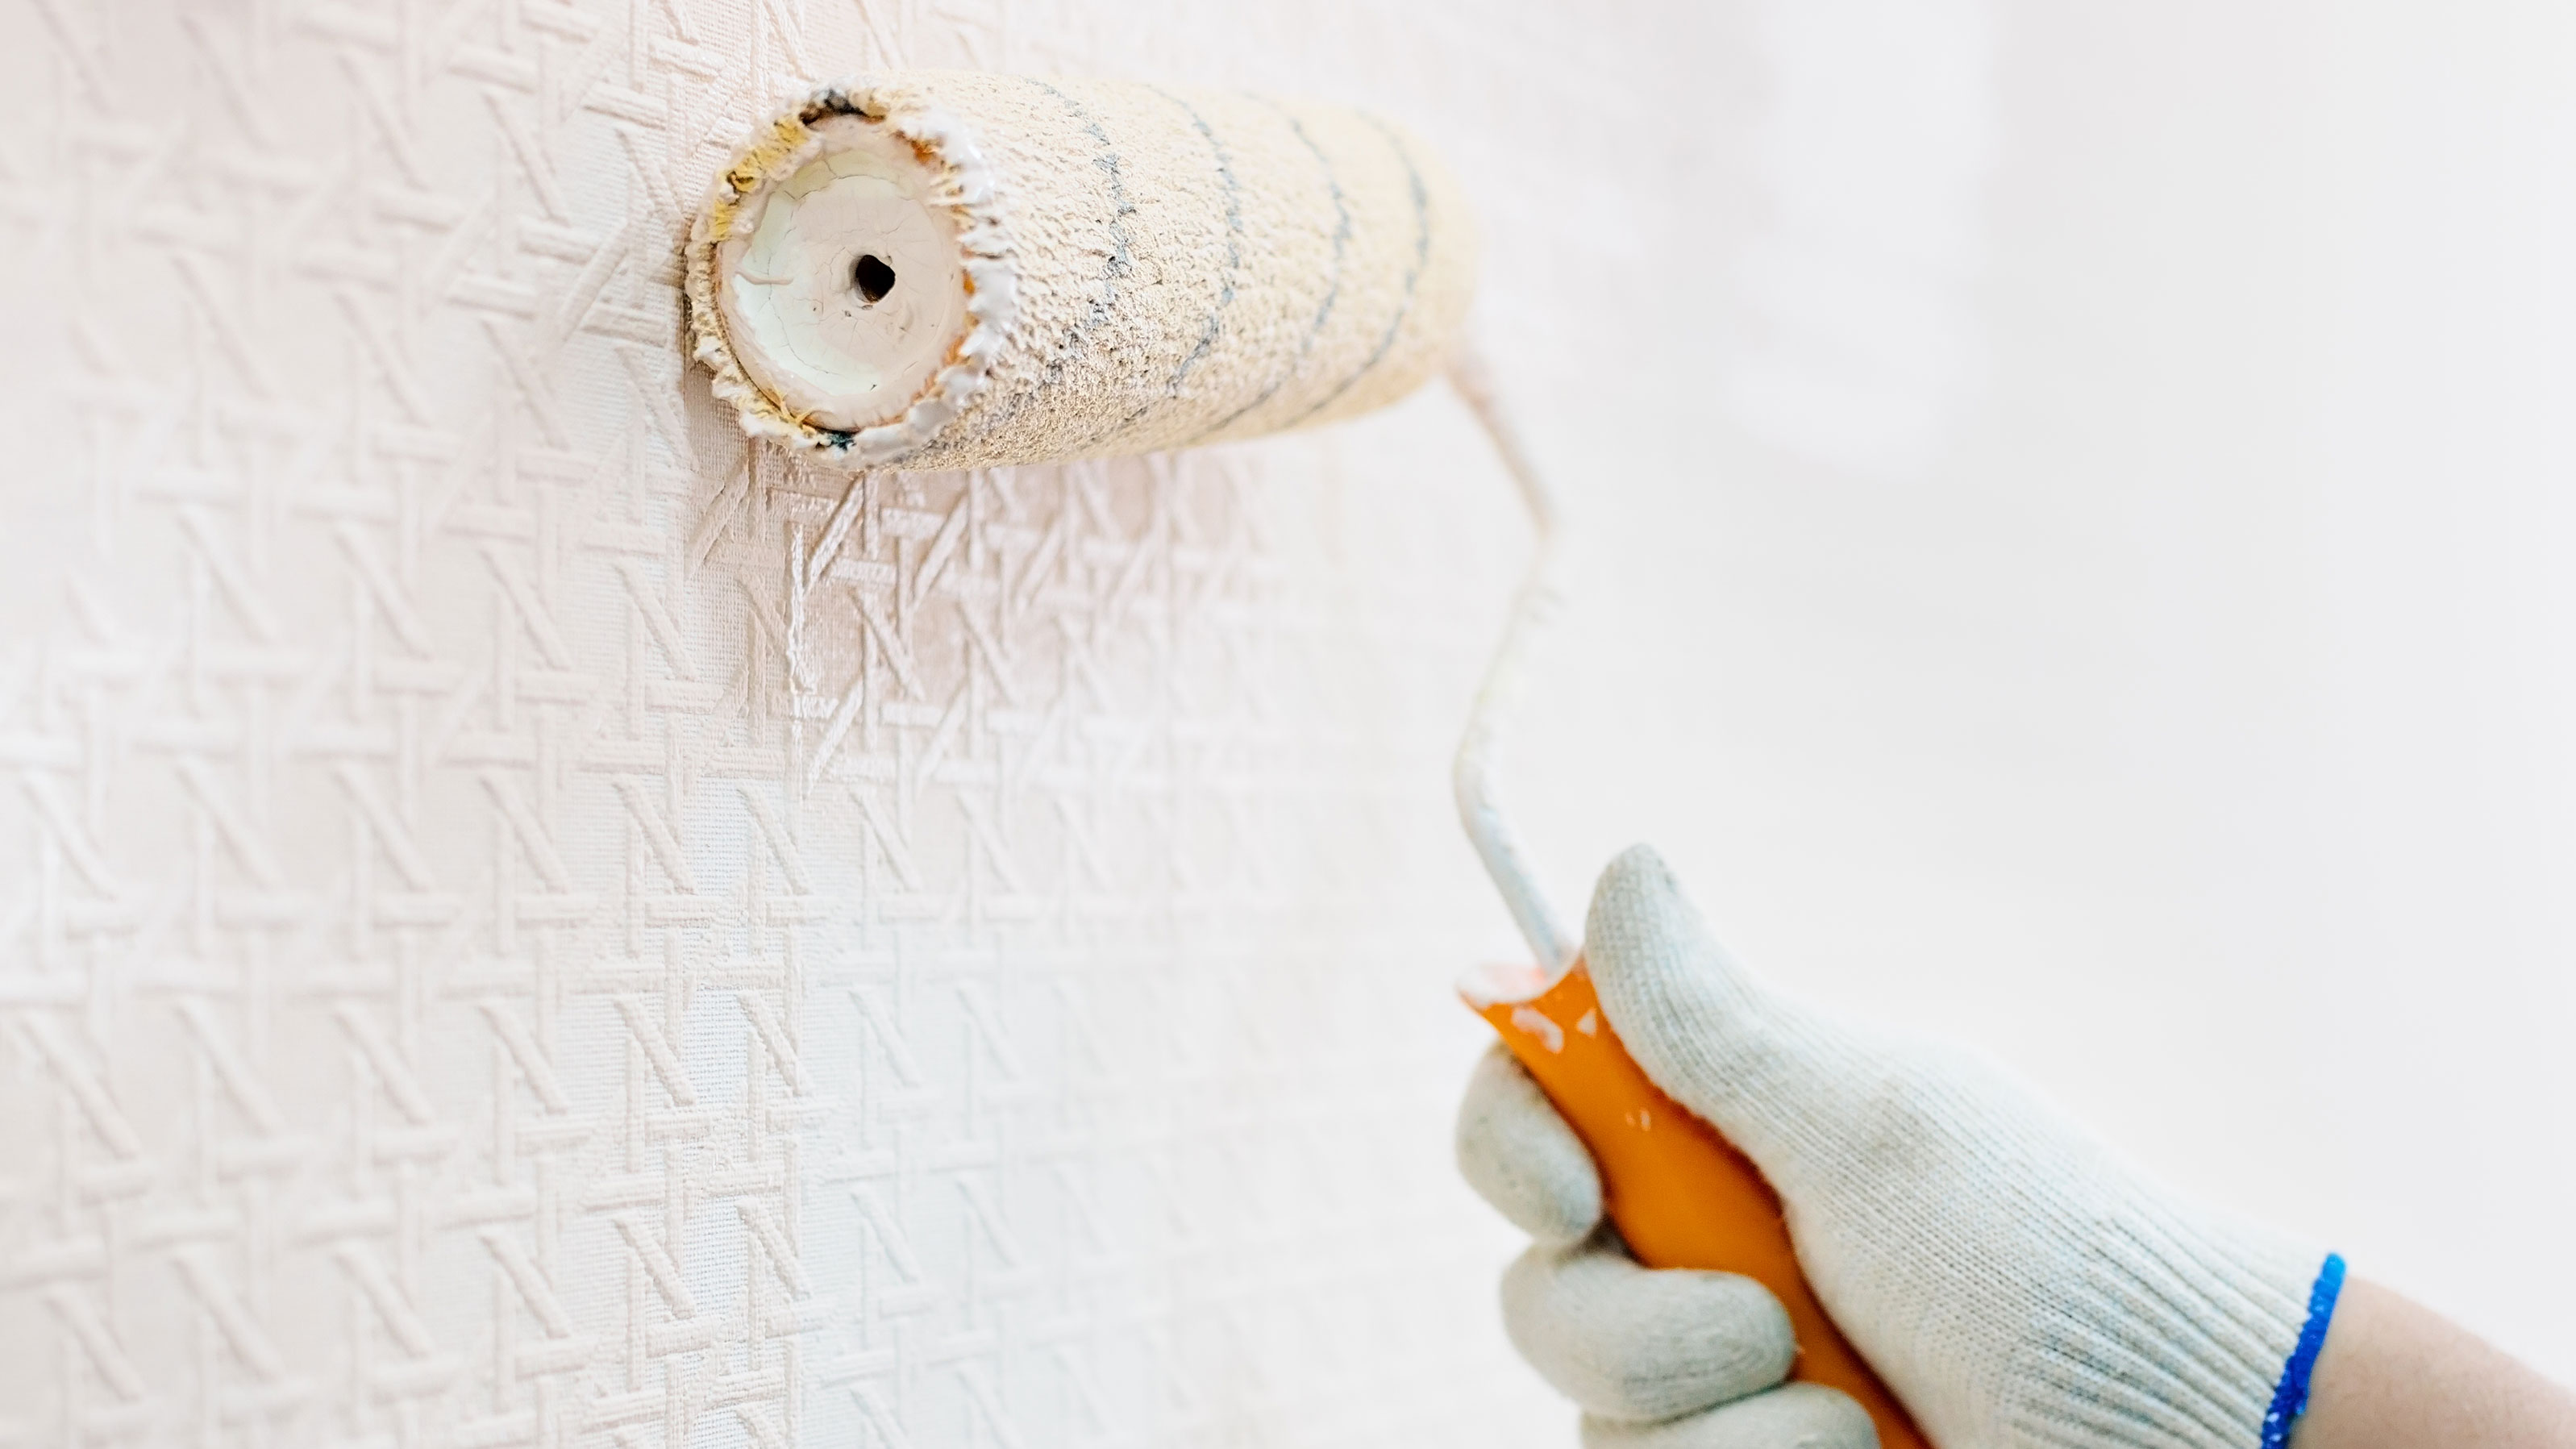 Painting Over Wallpaper: Is it a Good Idea? | Homebuilding